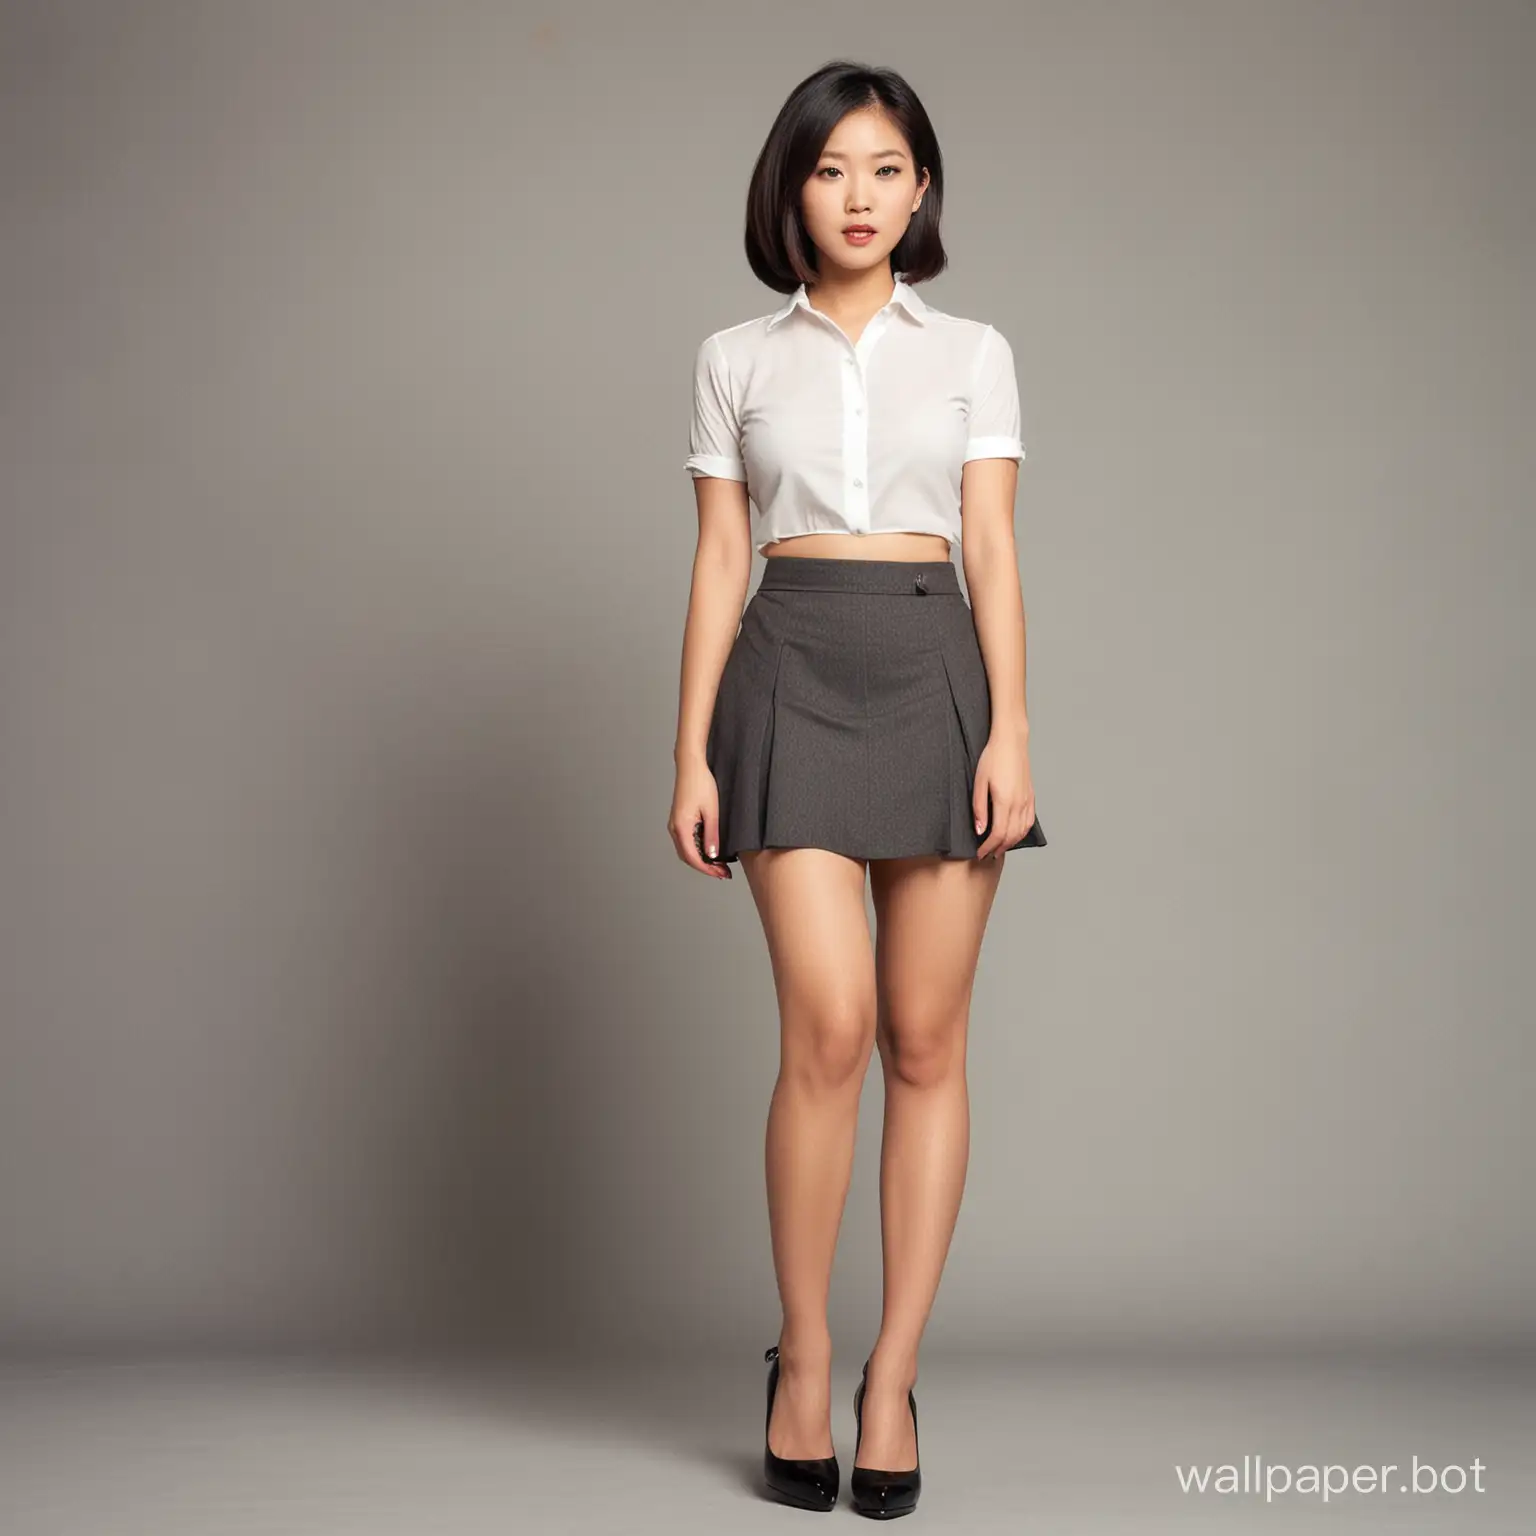 Vintage-Asian-Woman-in-Mini-Skirt-and-High-Heels-Standing